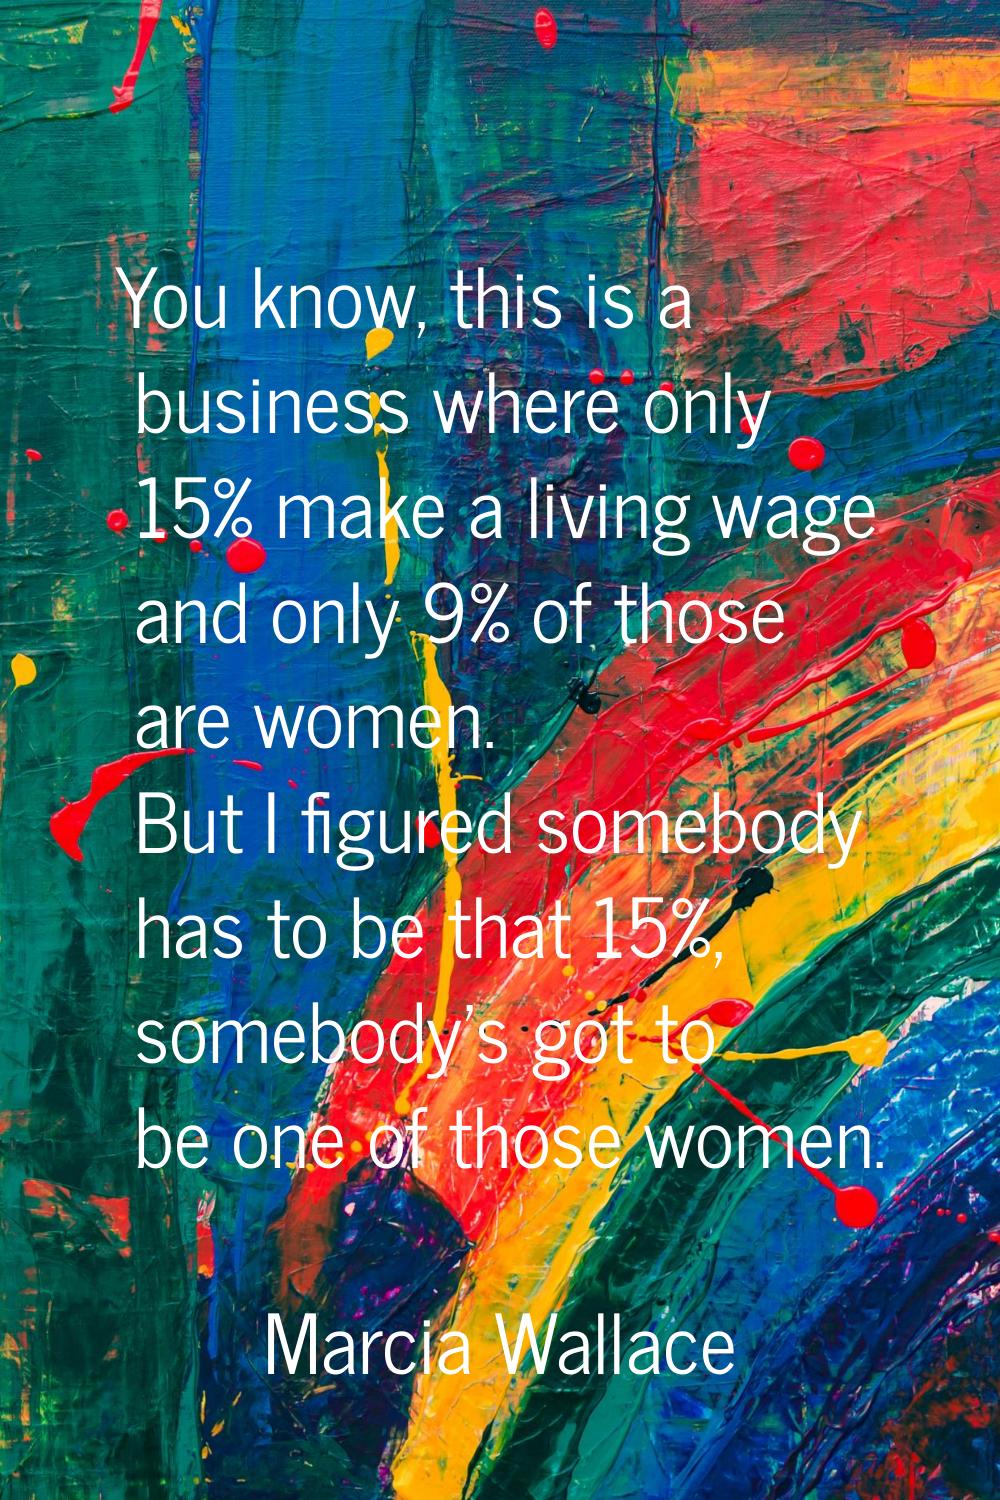 You know, this is a business where only 15% make a living wage and only 9% of those are women. But 